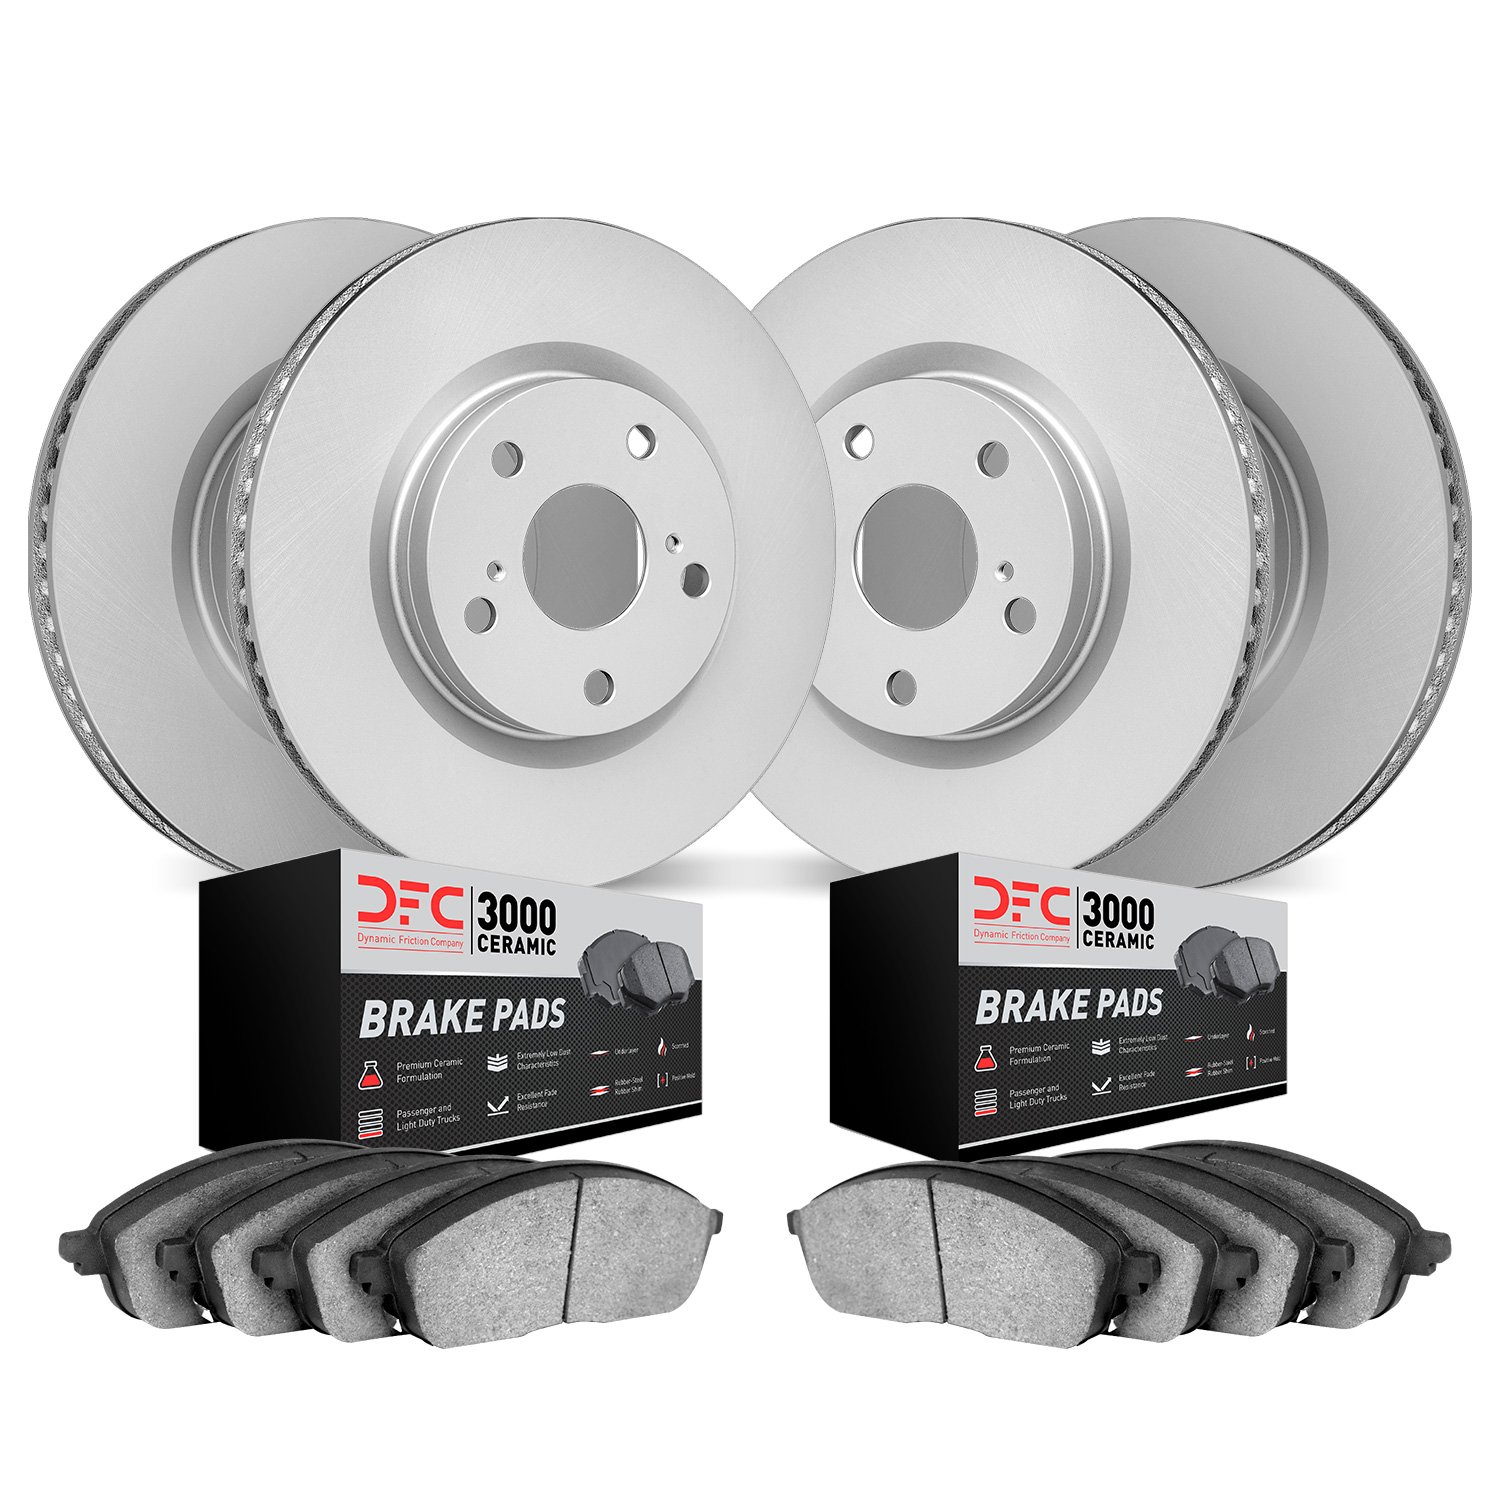 4304-31053 Geospec Brake Rotors with 3000-Series Ceramic Brake Pads Kit, 2008-2019 BMW, Position: Front and Rear